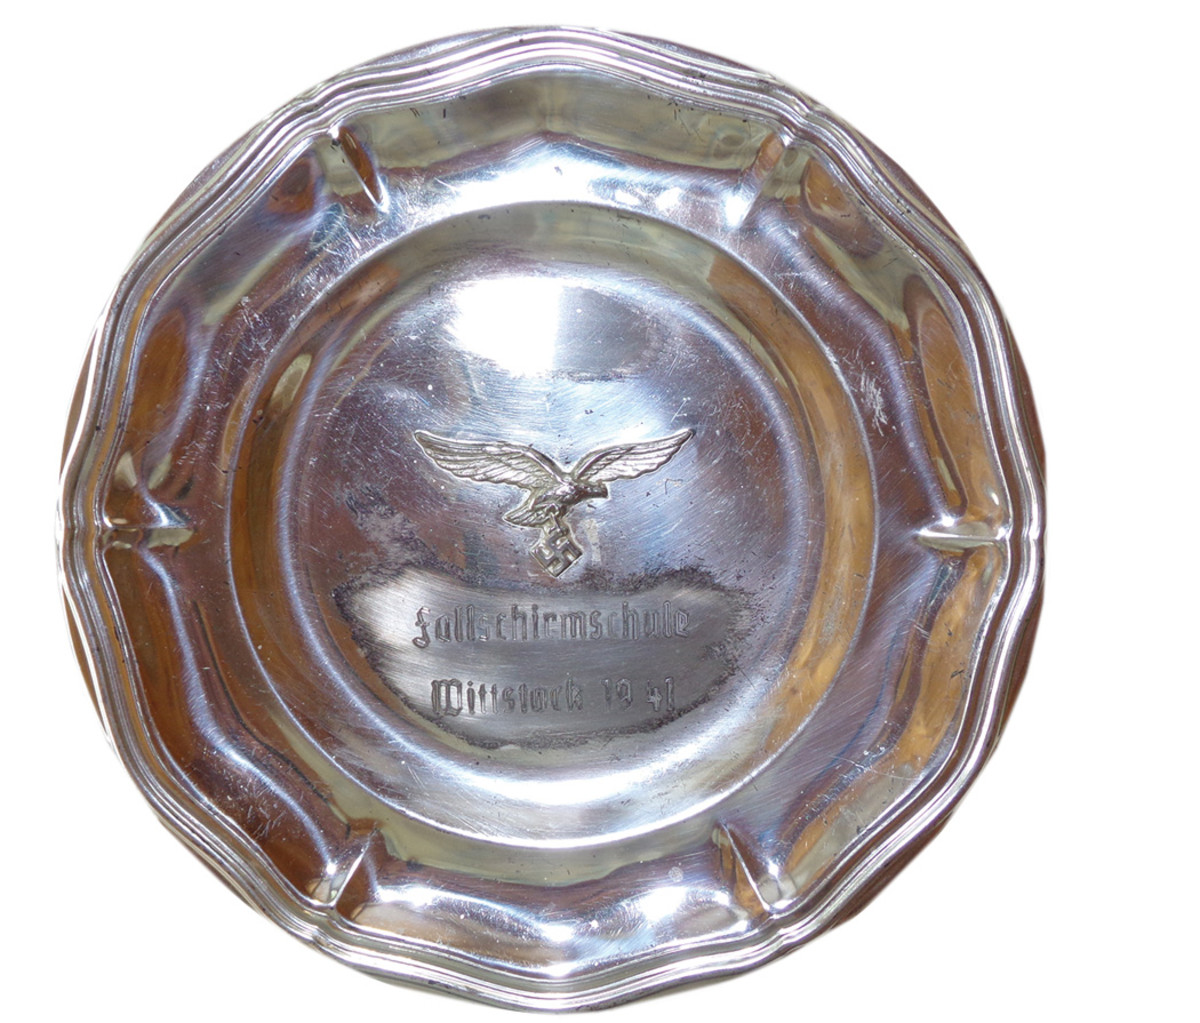 Pride in the service could be seen in mementos such as this silver plate from the paratrooper training school in Wittstock, dated 1941.